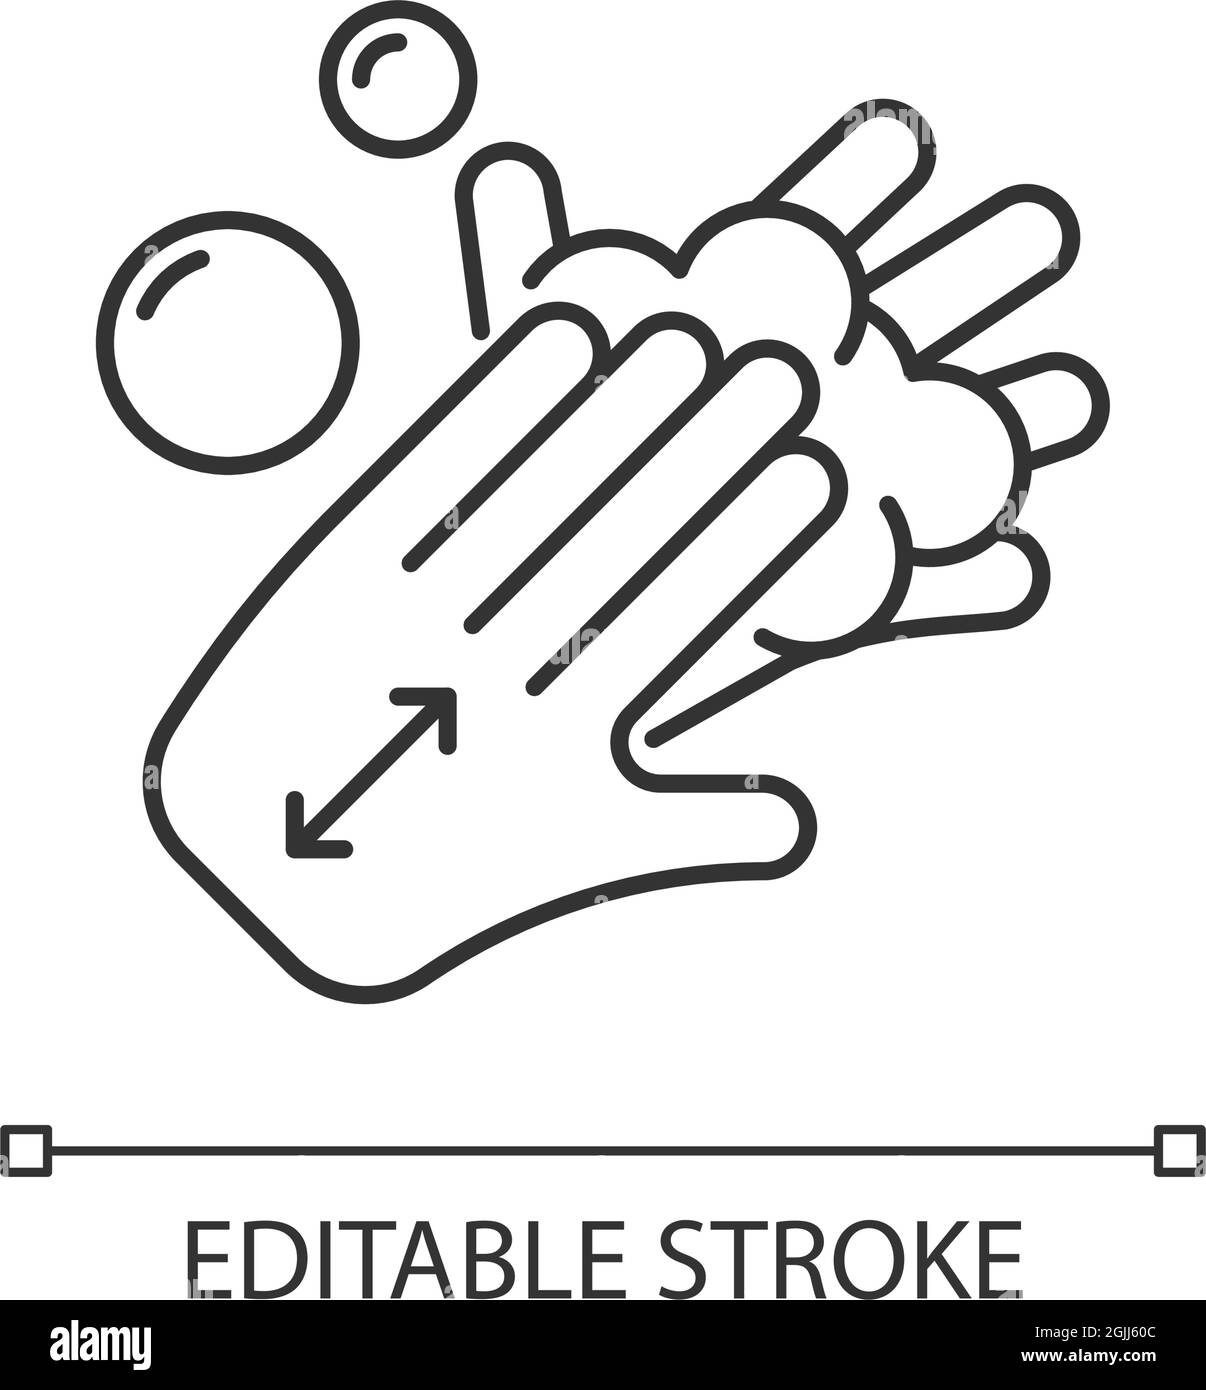 Lathering back of hands linear icon Stock Vector